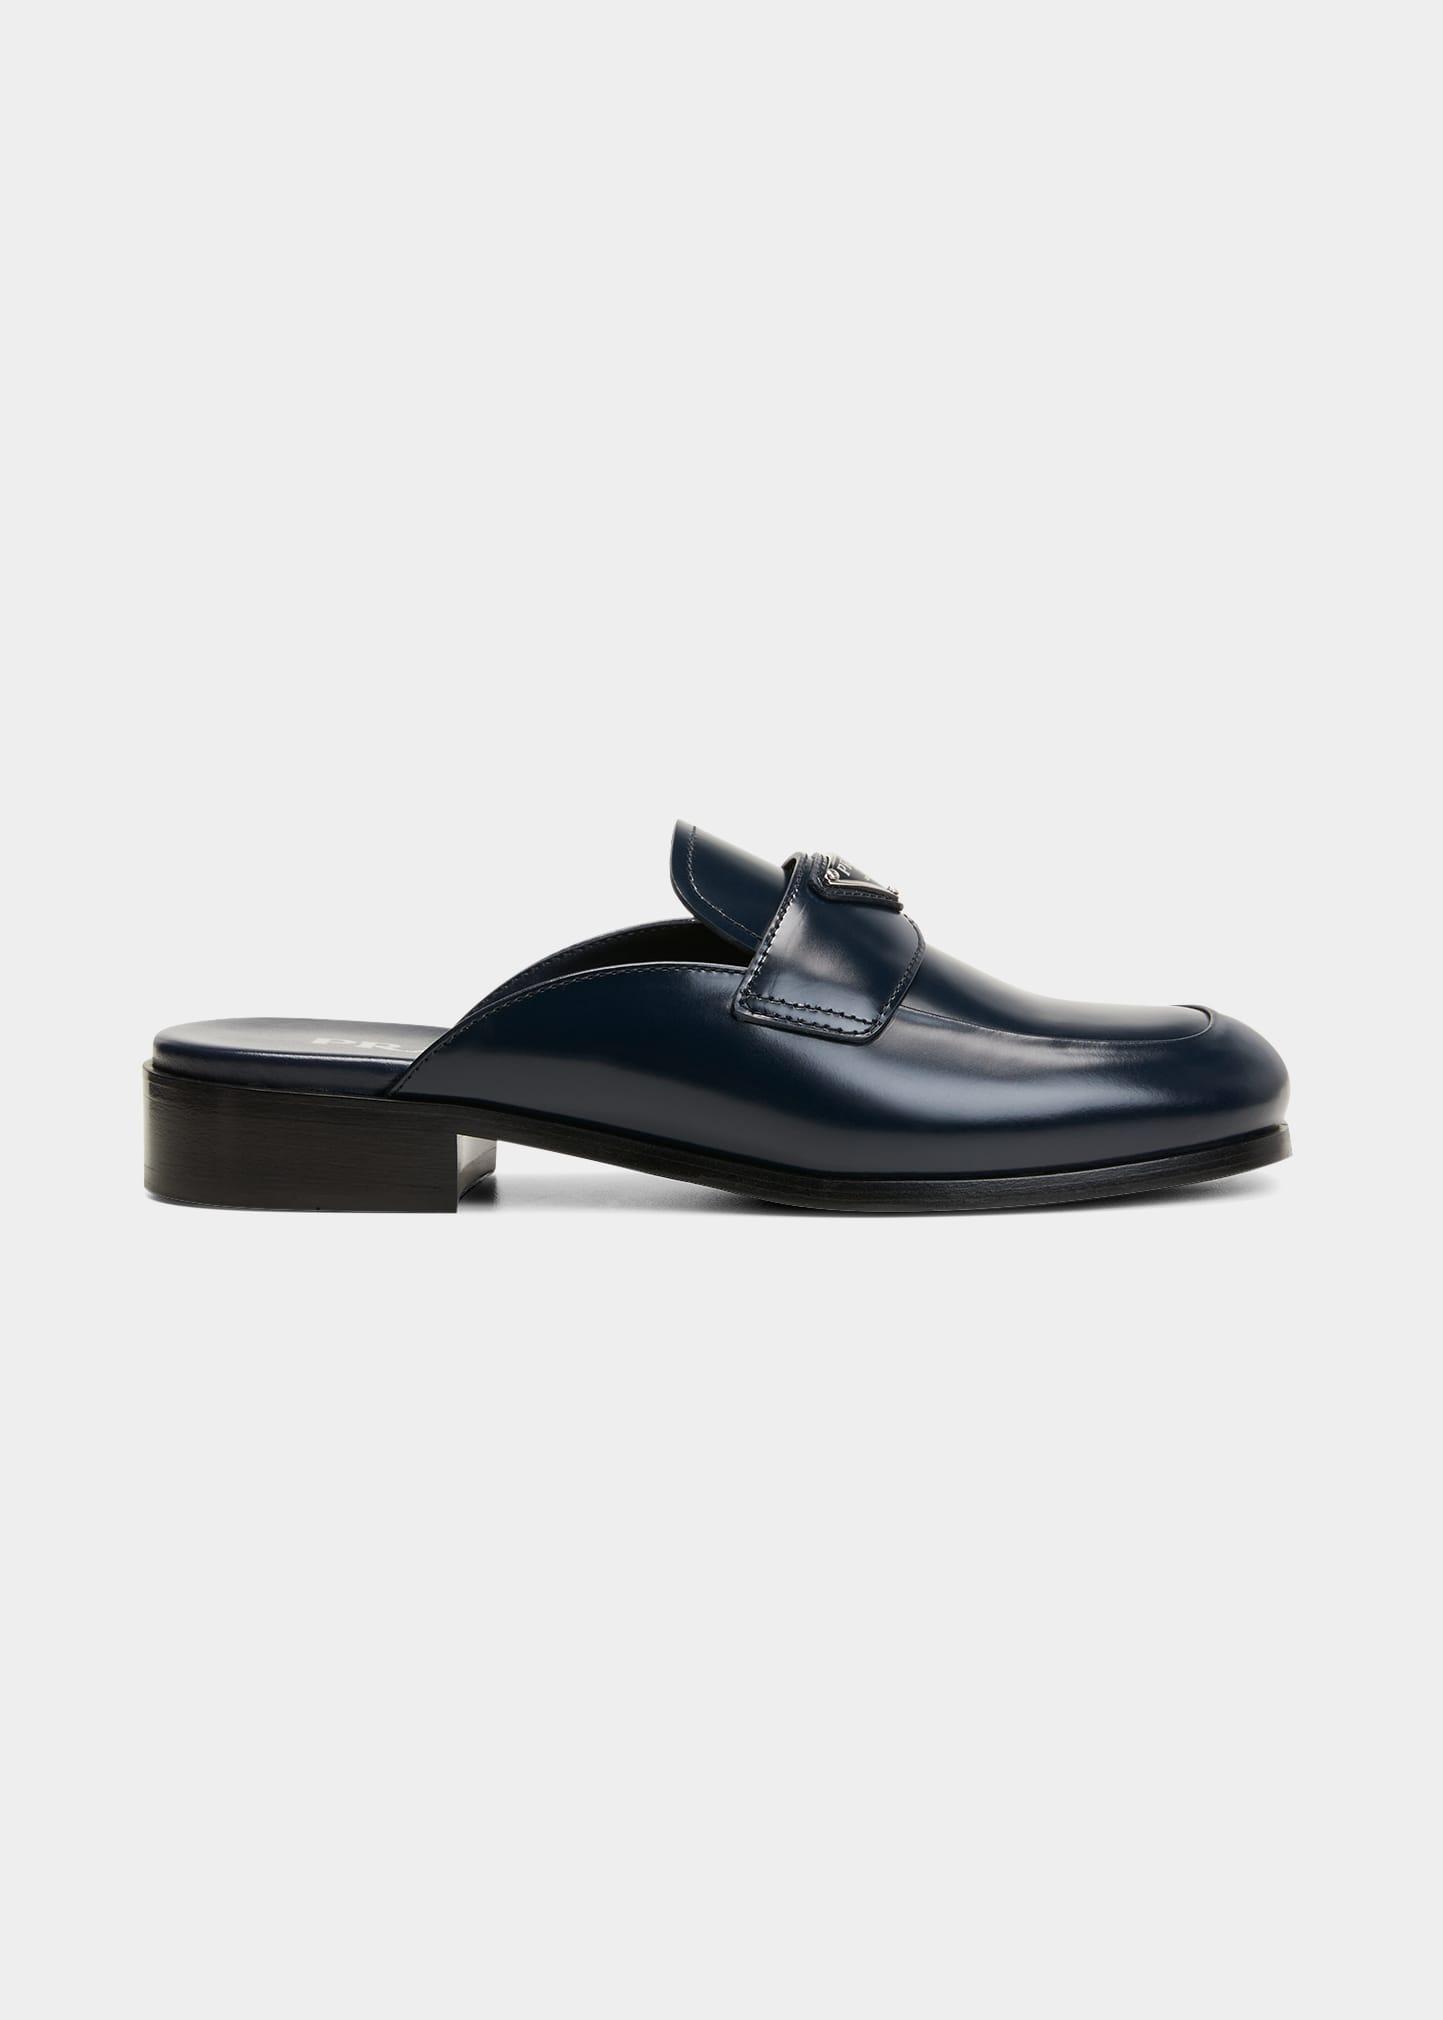 Prada Leather Loafer Slide Mules in Blue | Lyst